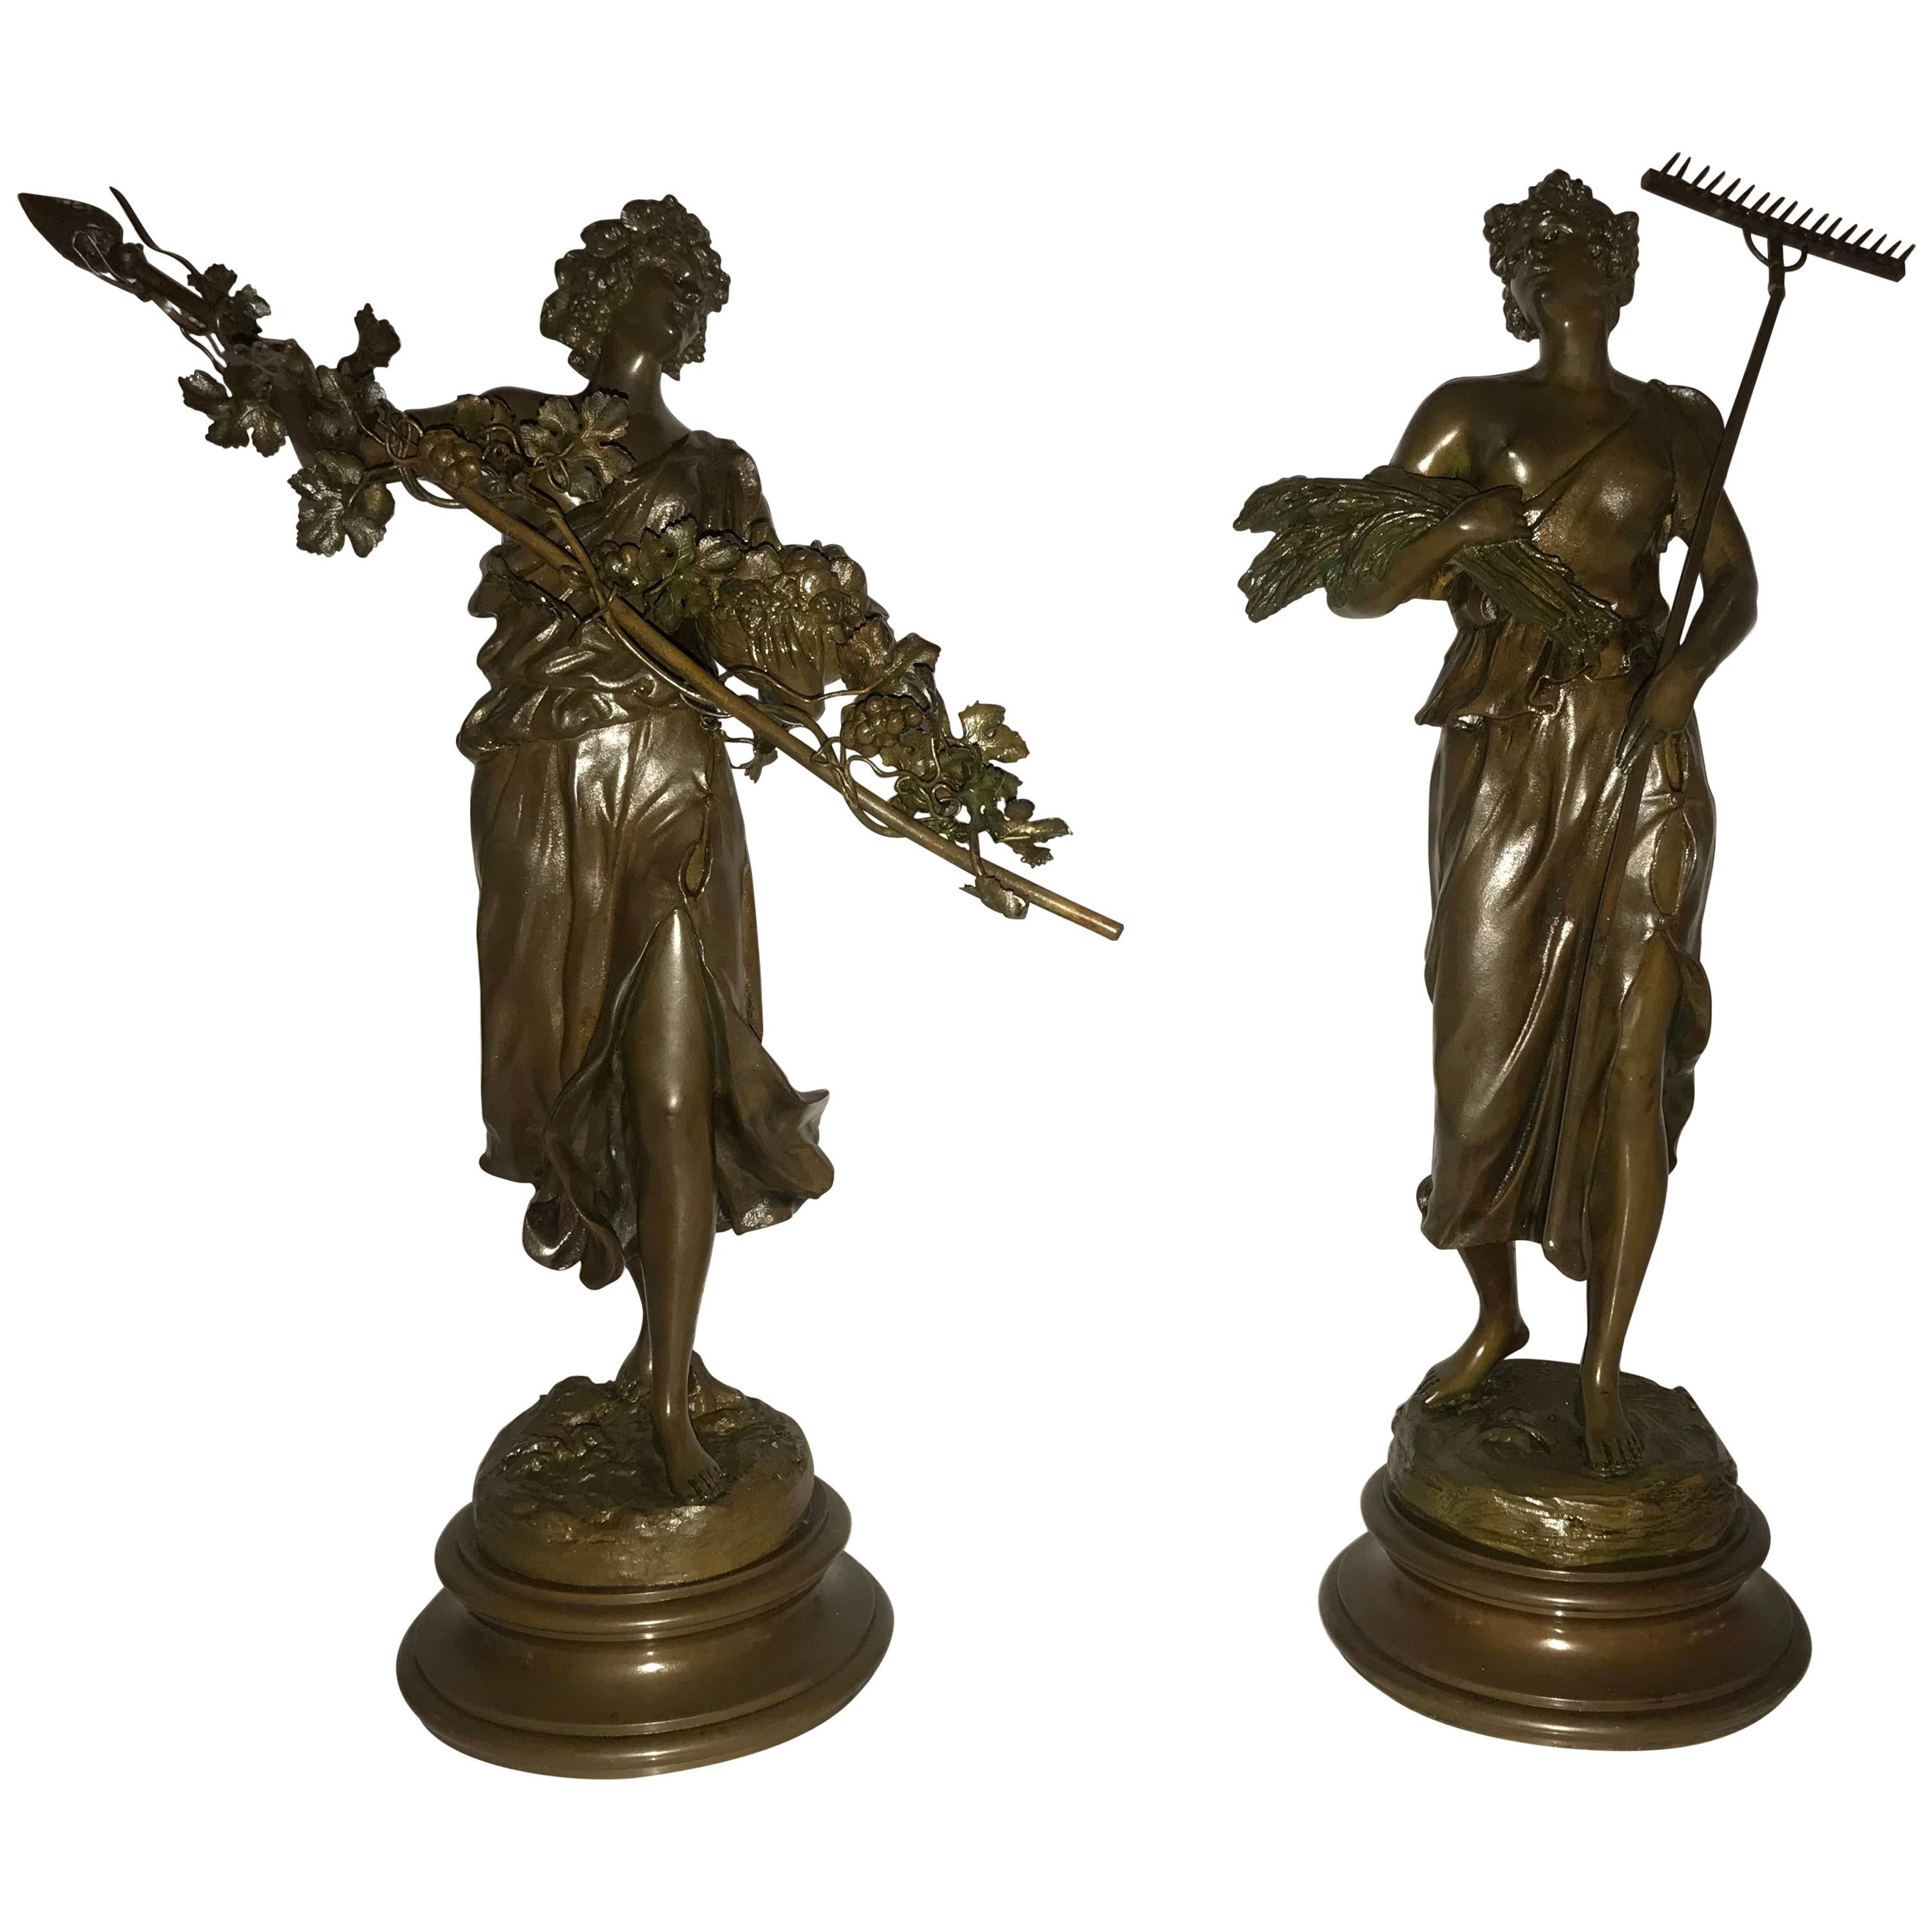 Pair of 19th/20th Century Bronze Figures Bare Breasted Female Gardeners